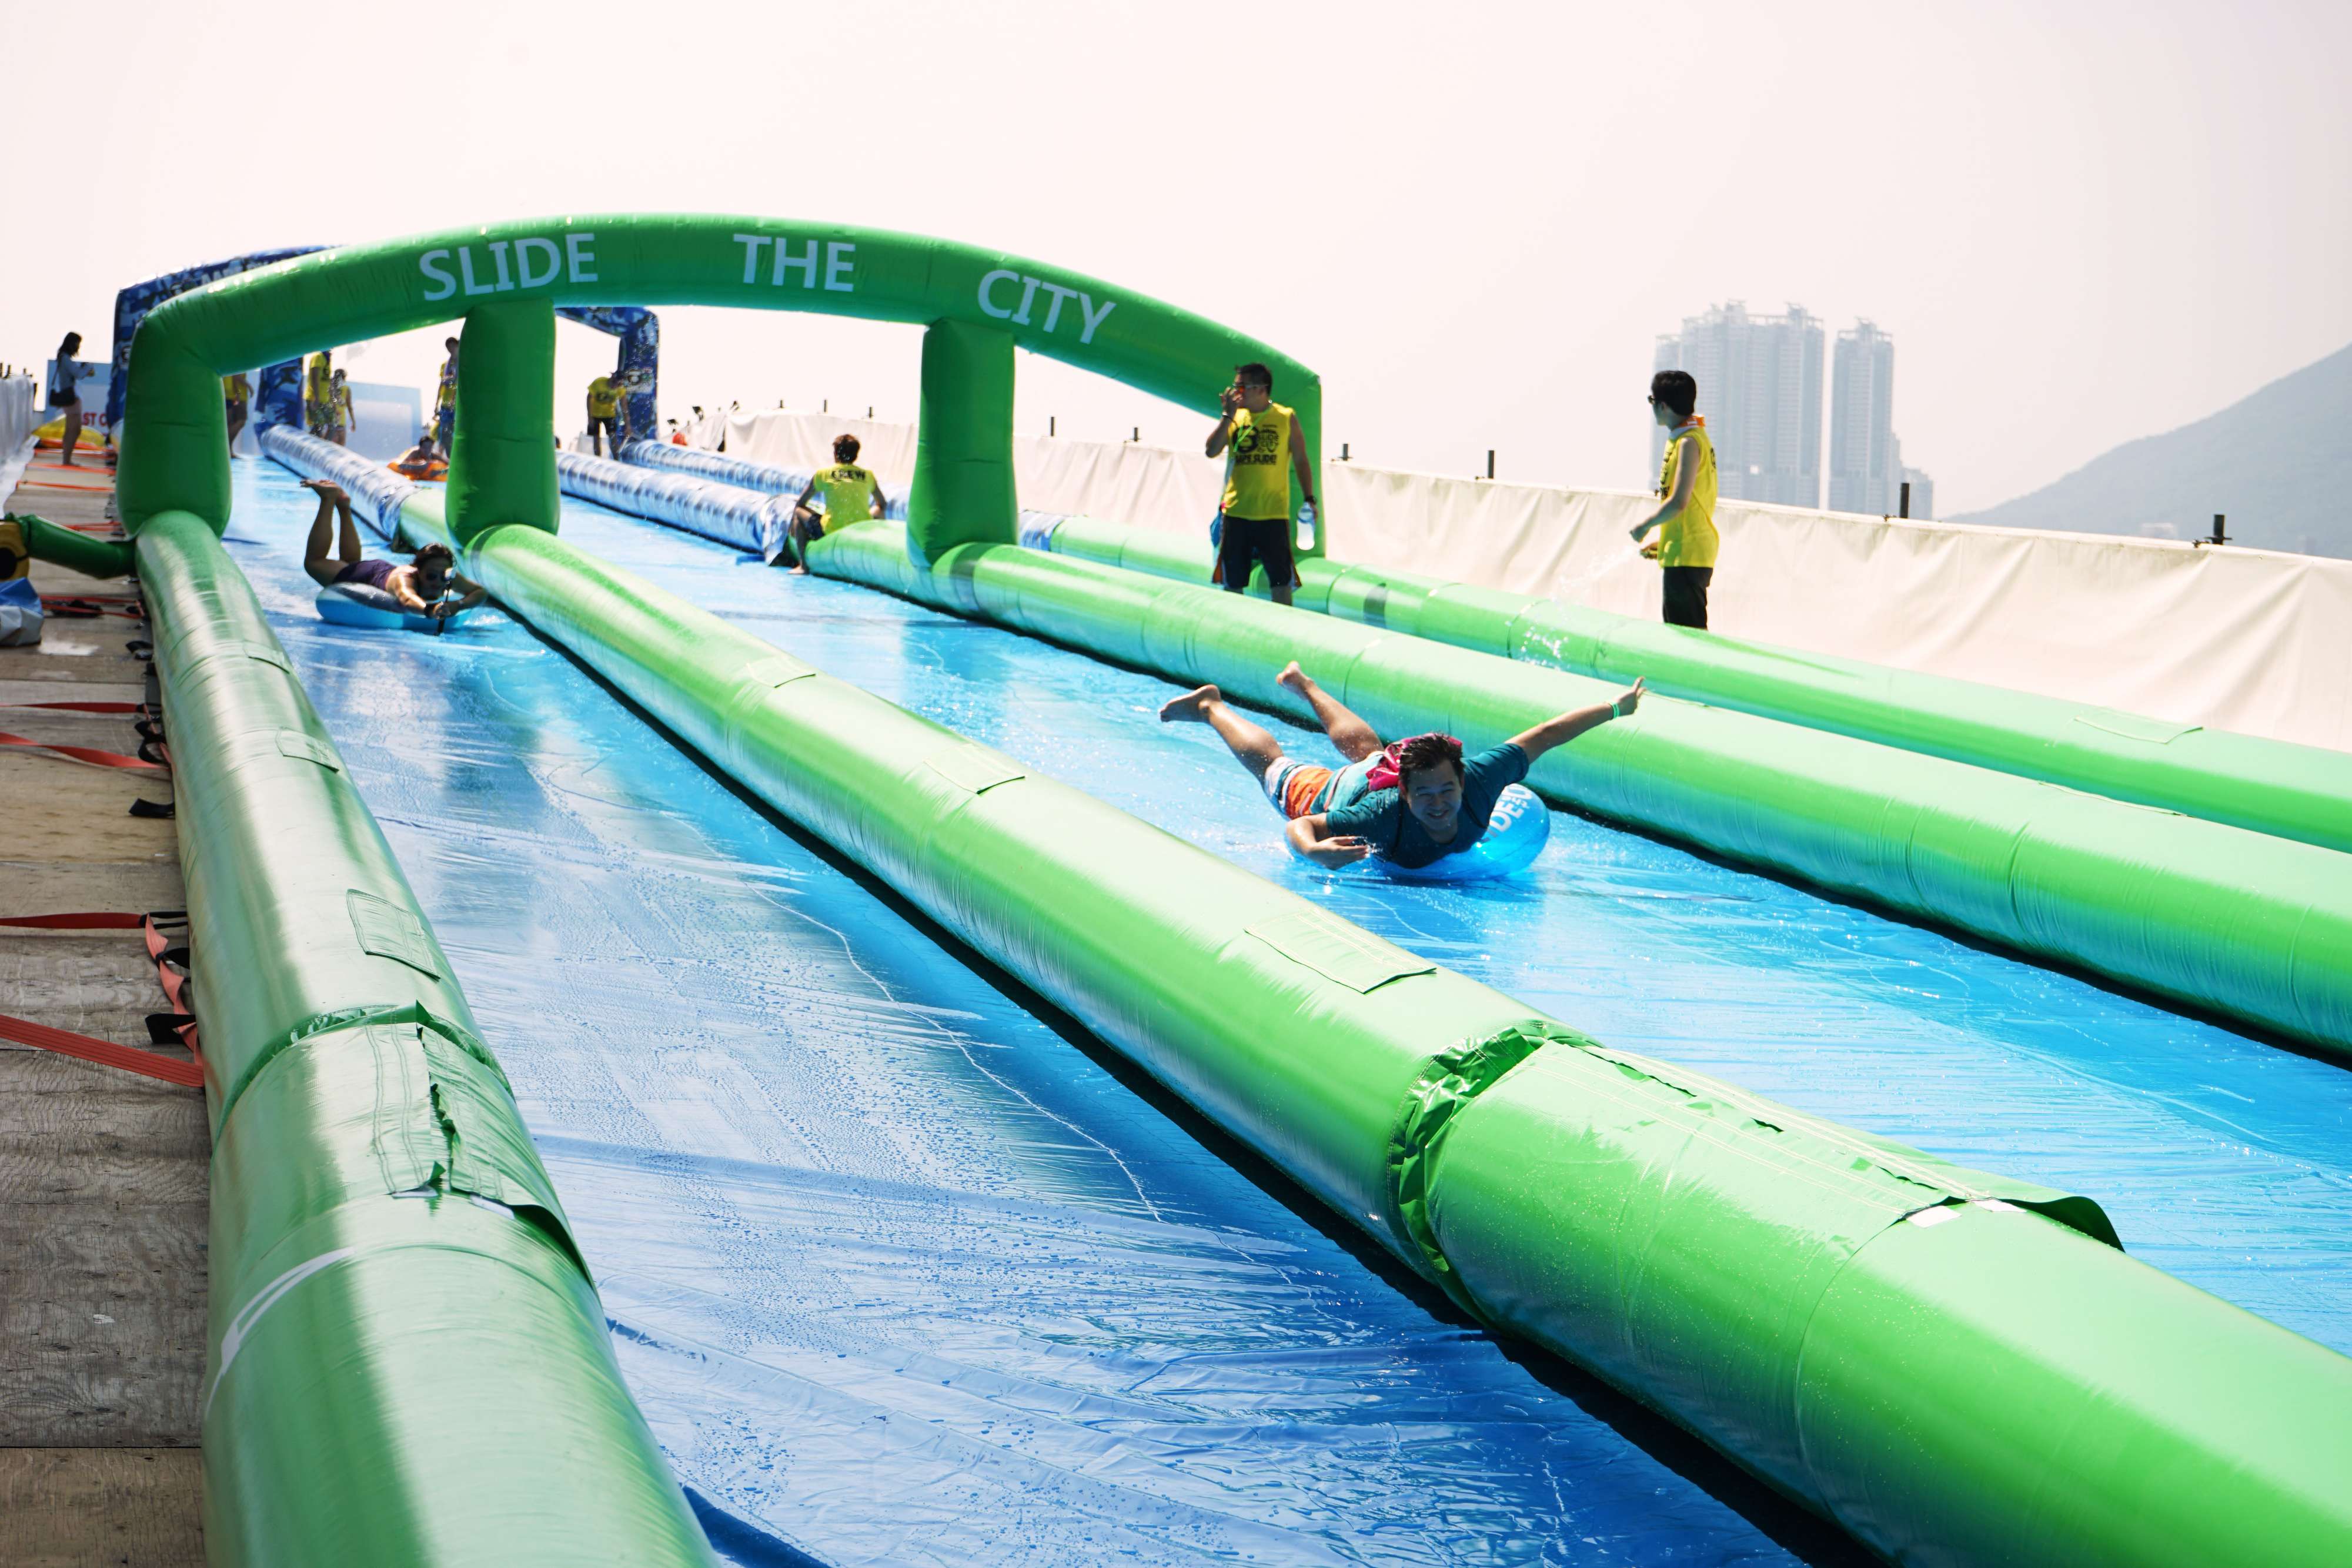 Ride the giant water slide in Central this summer.